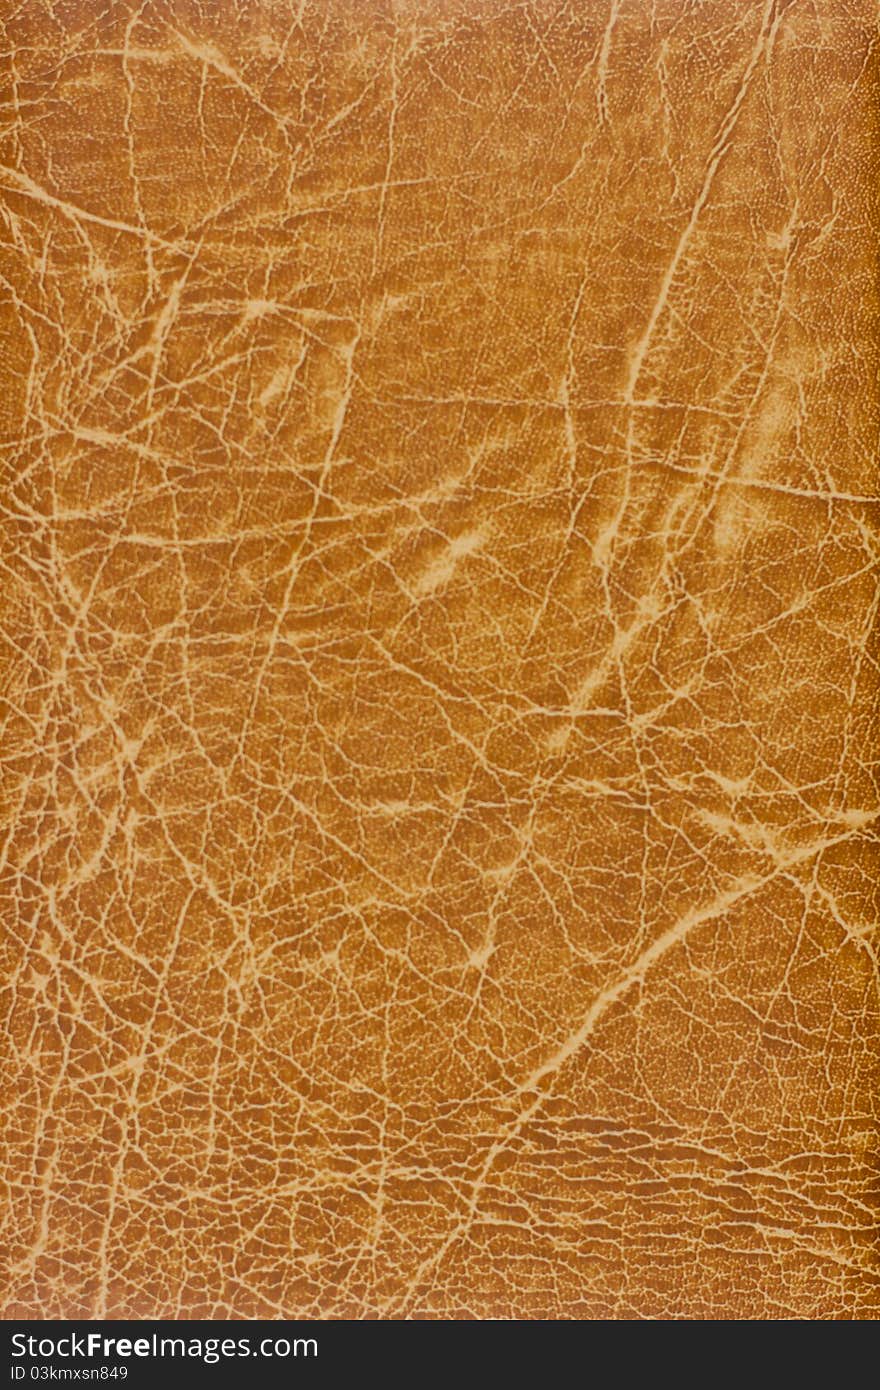 Old paper texture with brown colors. Old paper texture with brown colors.